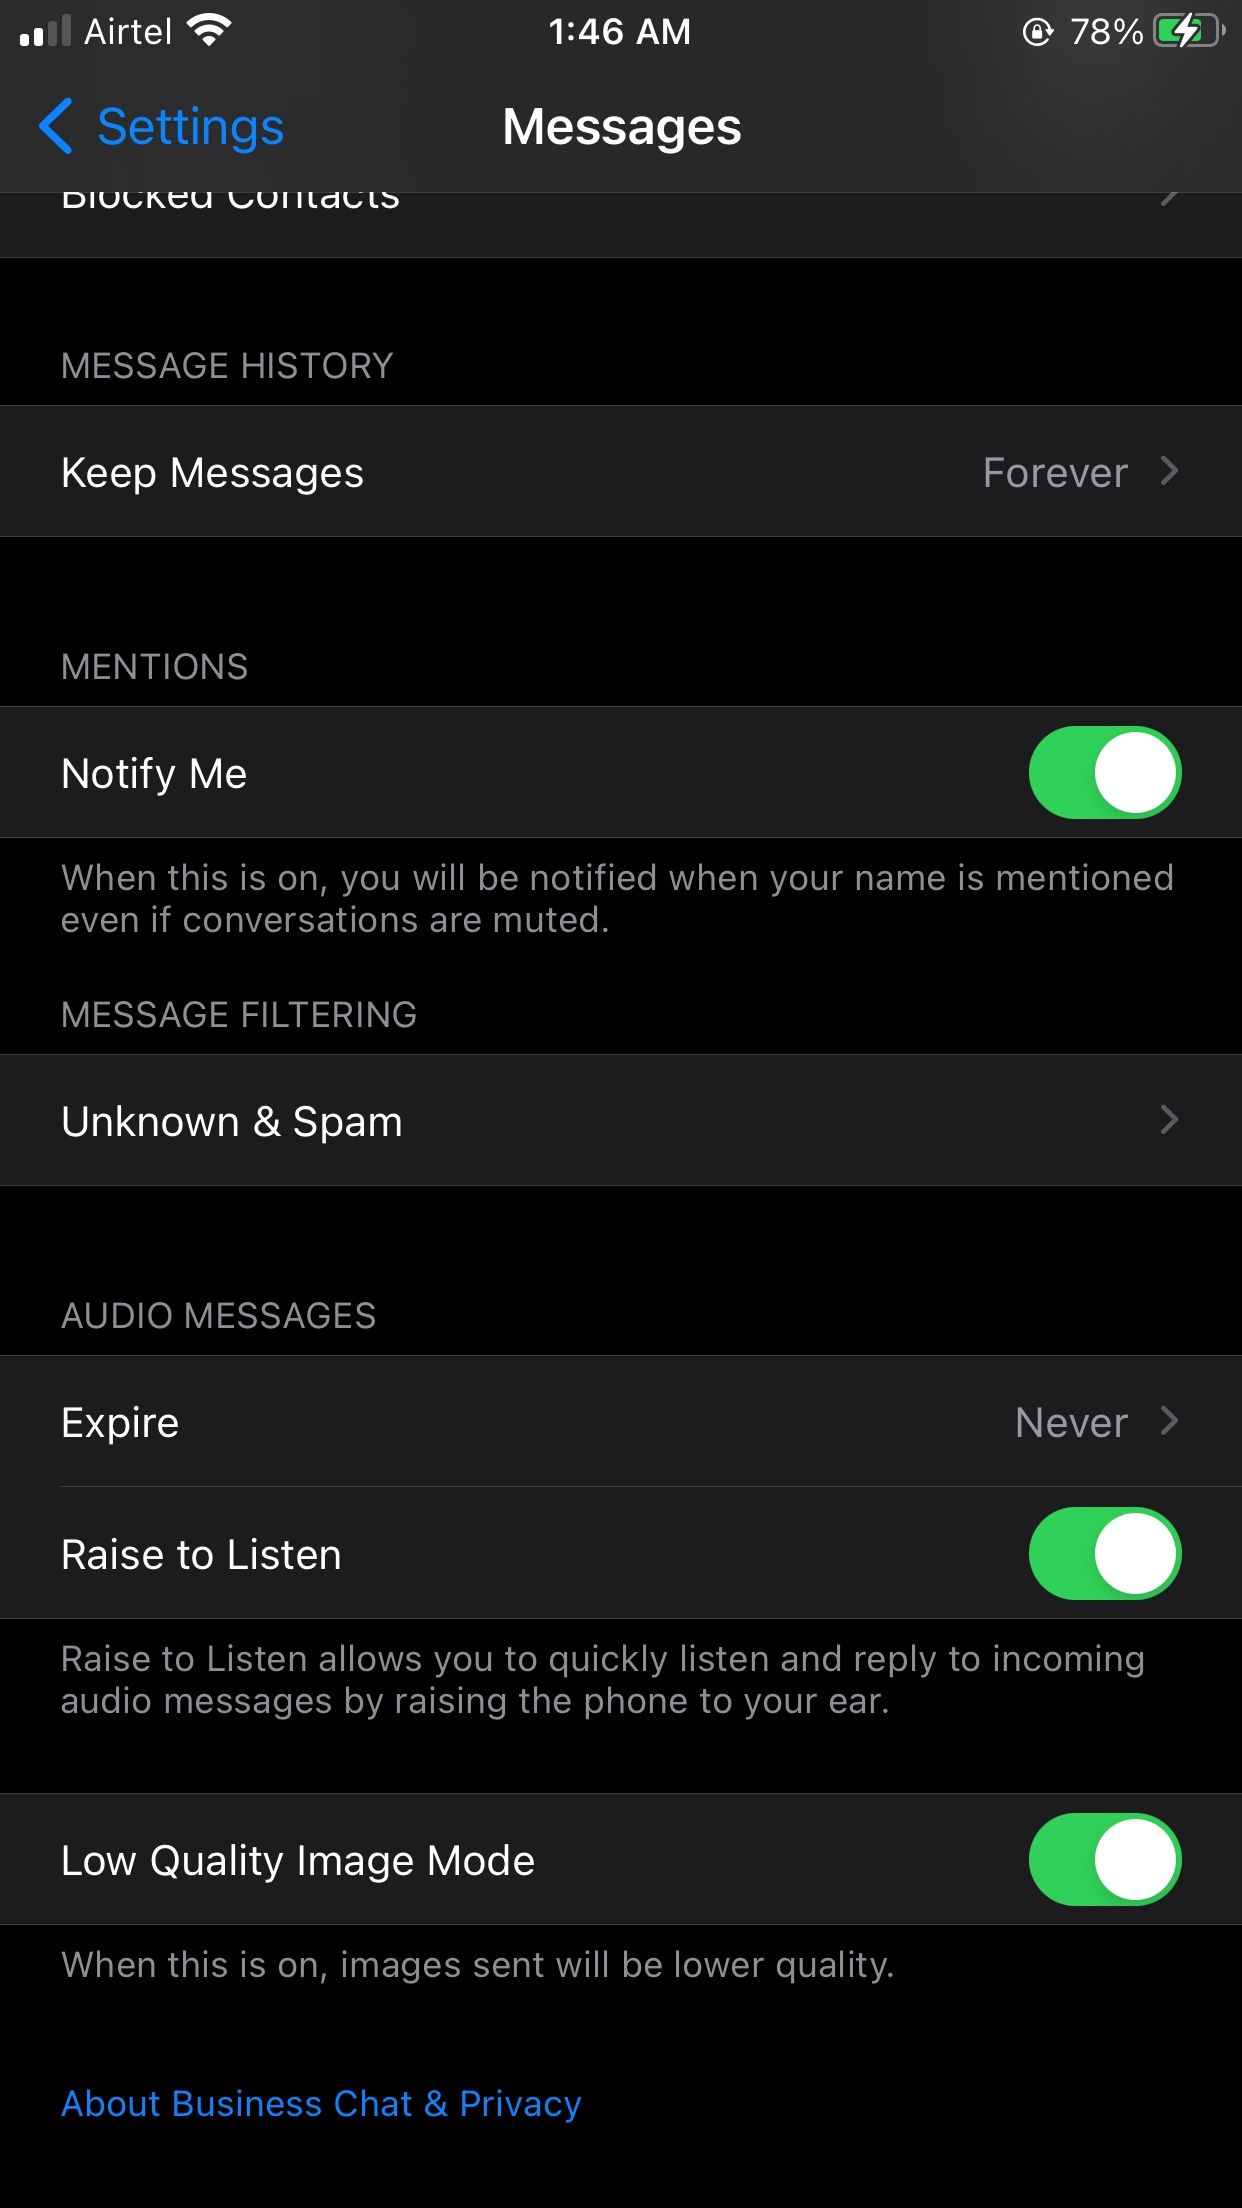 Flick the Toggle for Notify Me option